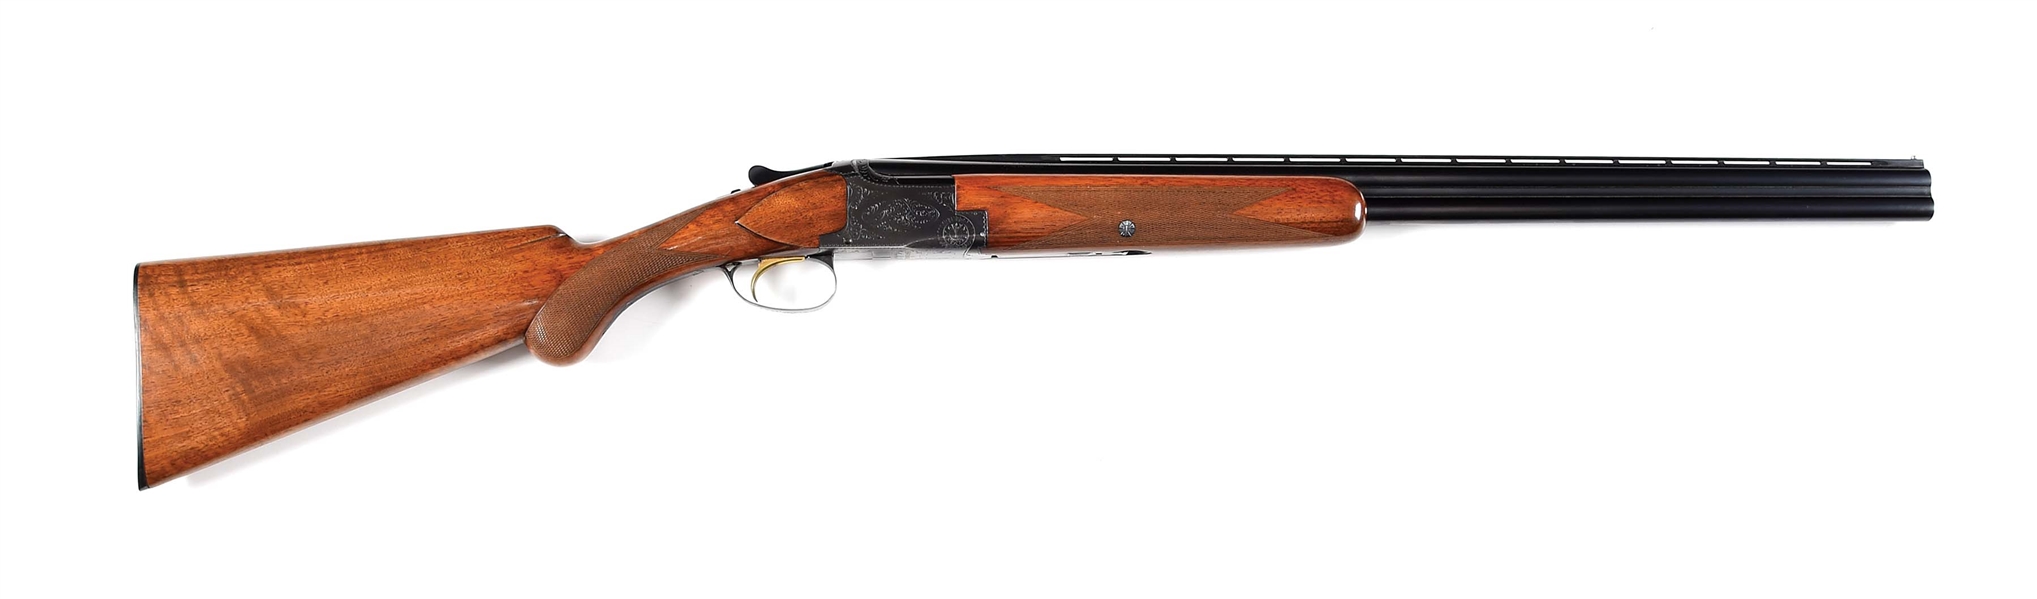 (C) BROWNING SUPERPOSED 20 BORE OVER UNDER SHOTGUN WITH CASE.